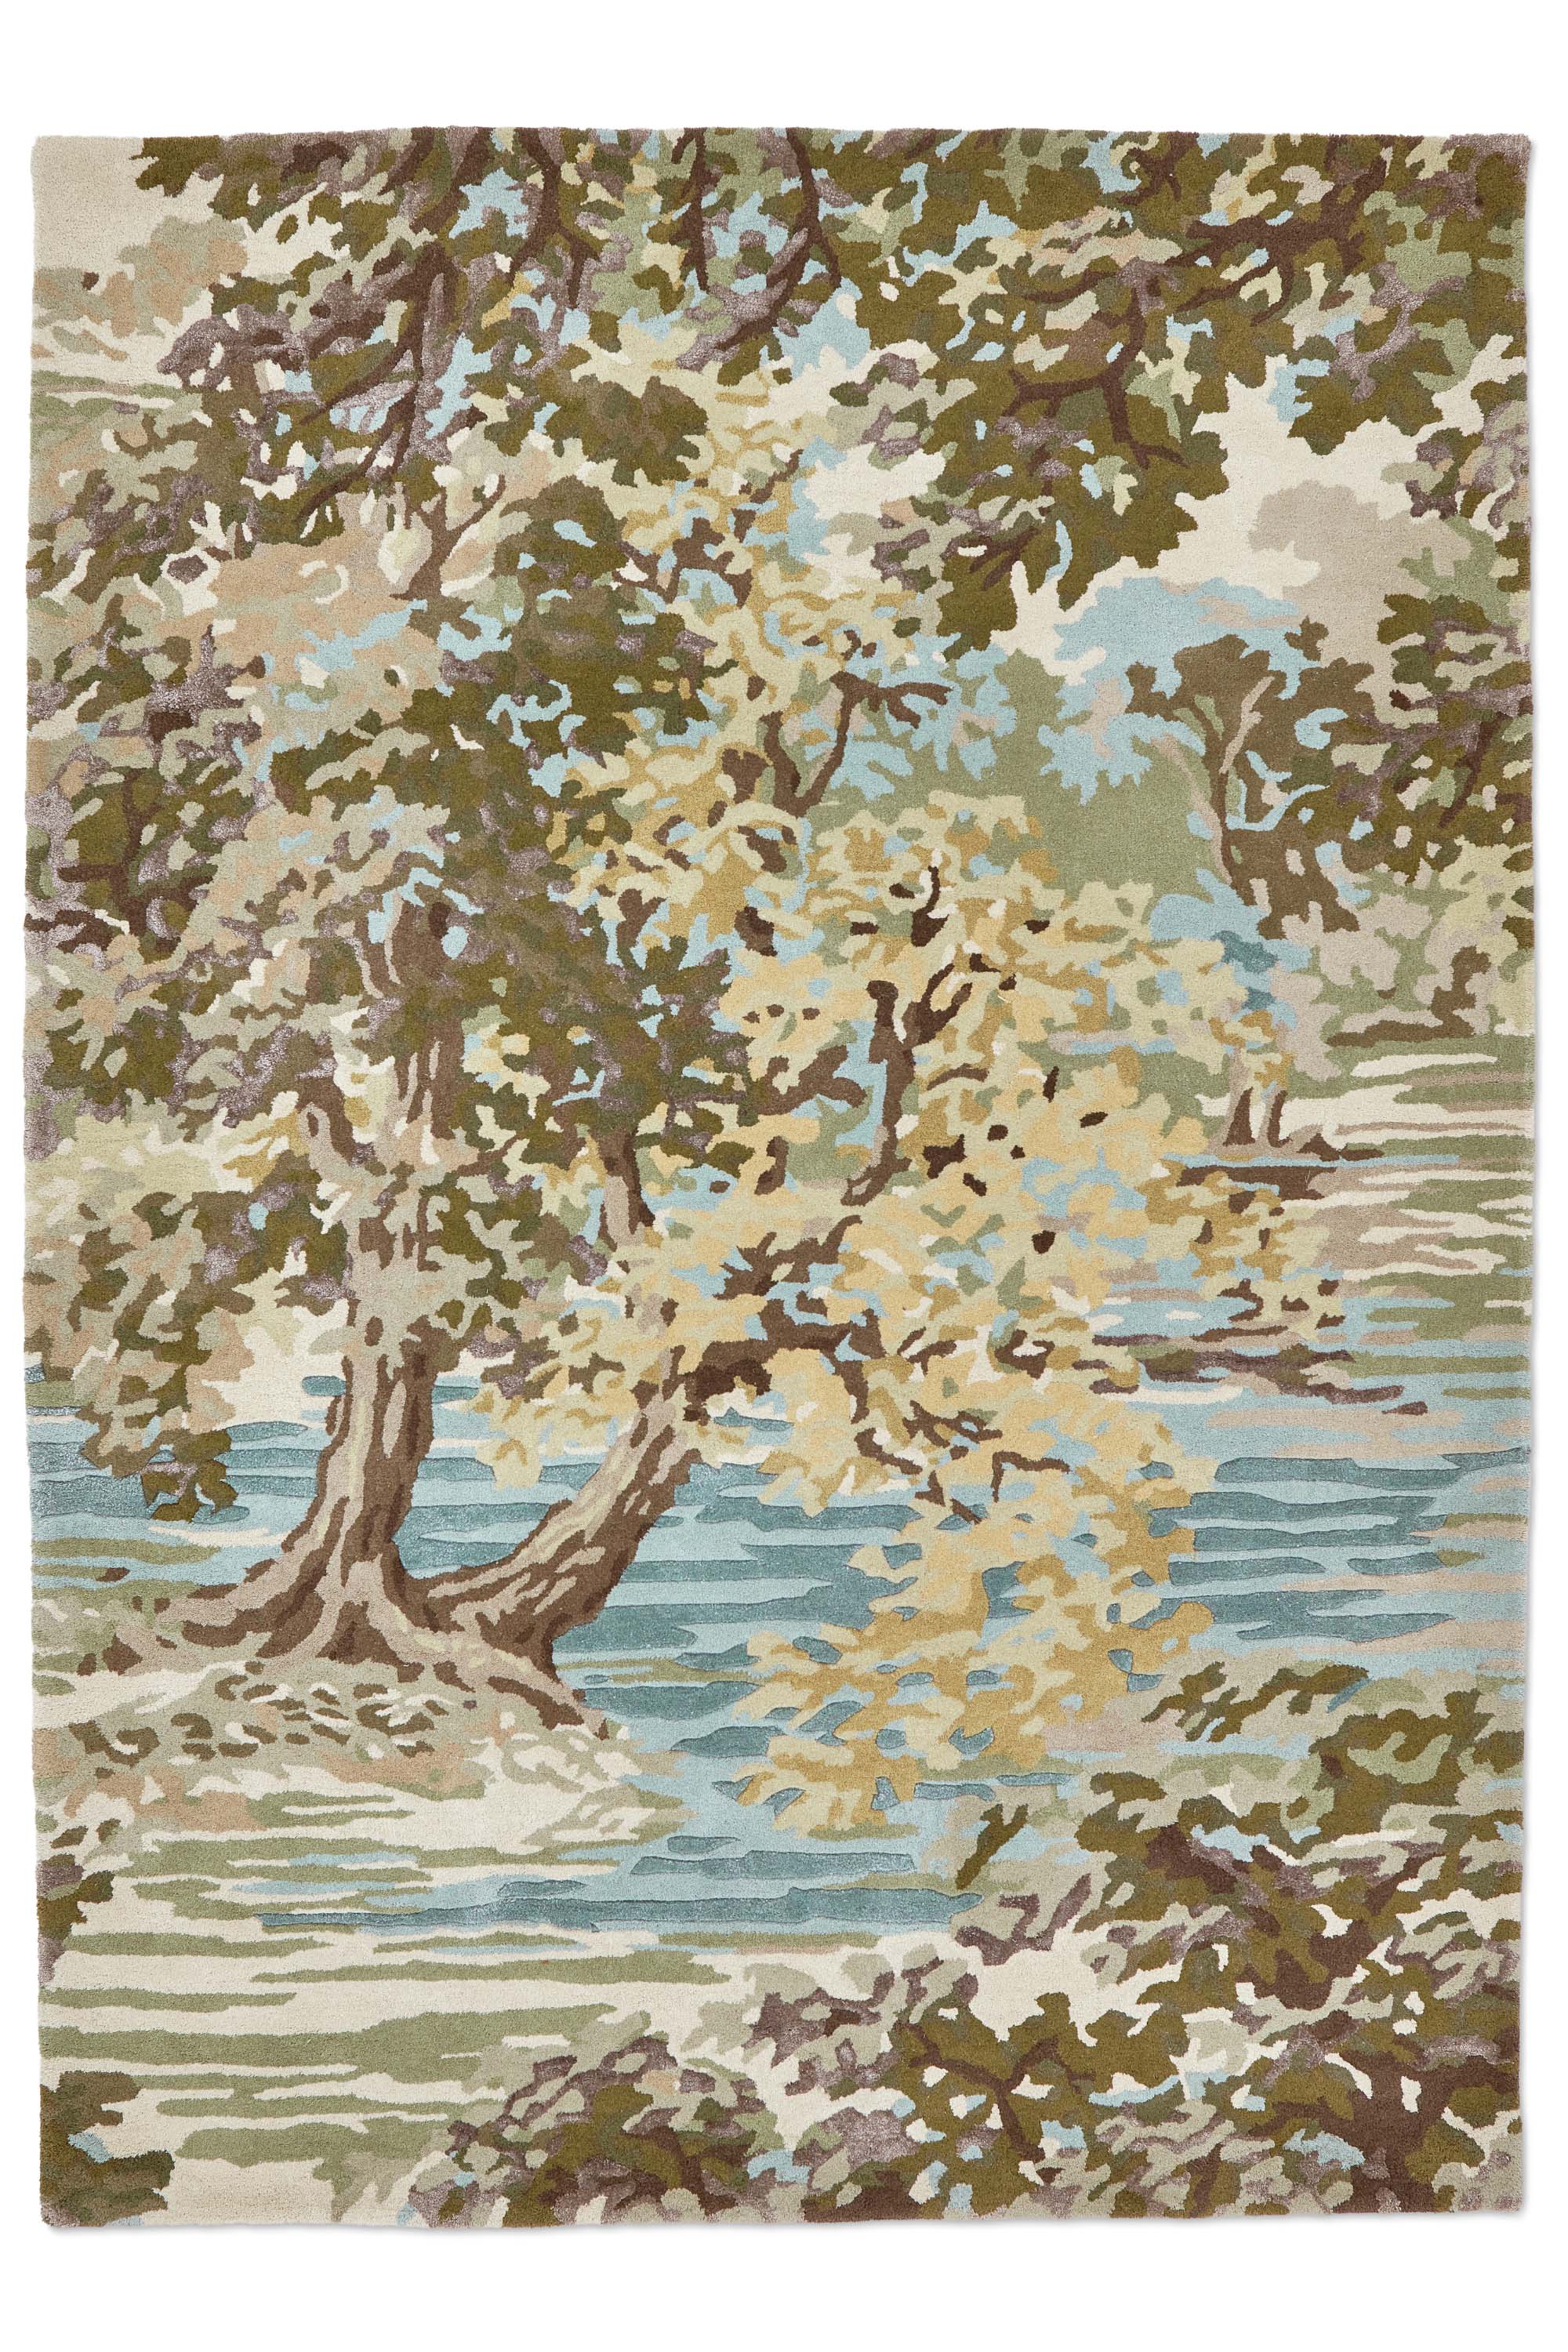 Green, blue and brown floral rug with waterside pattern